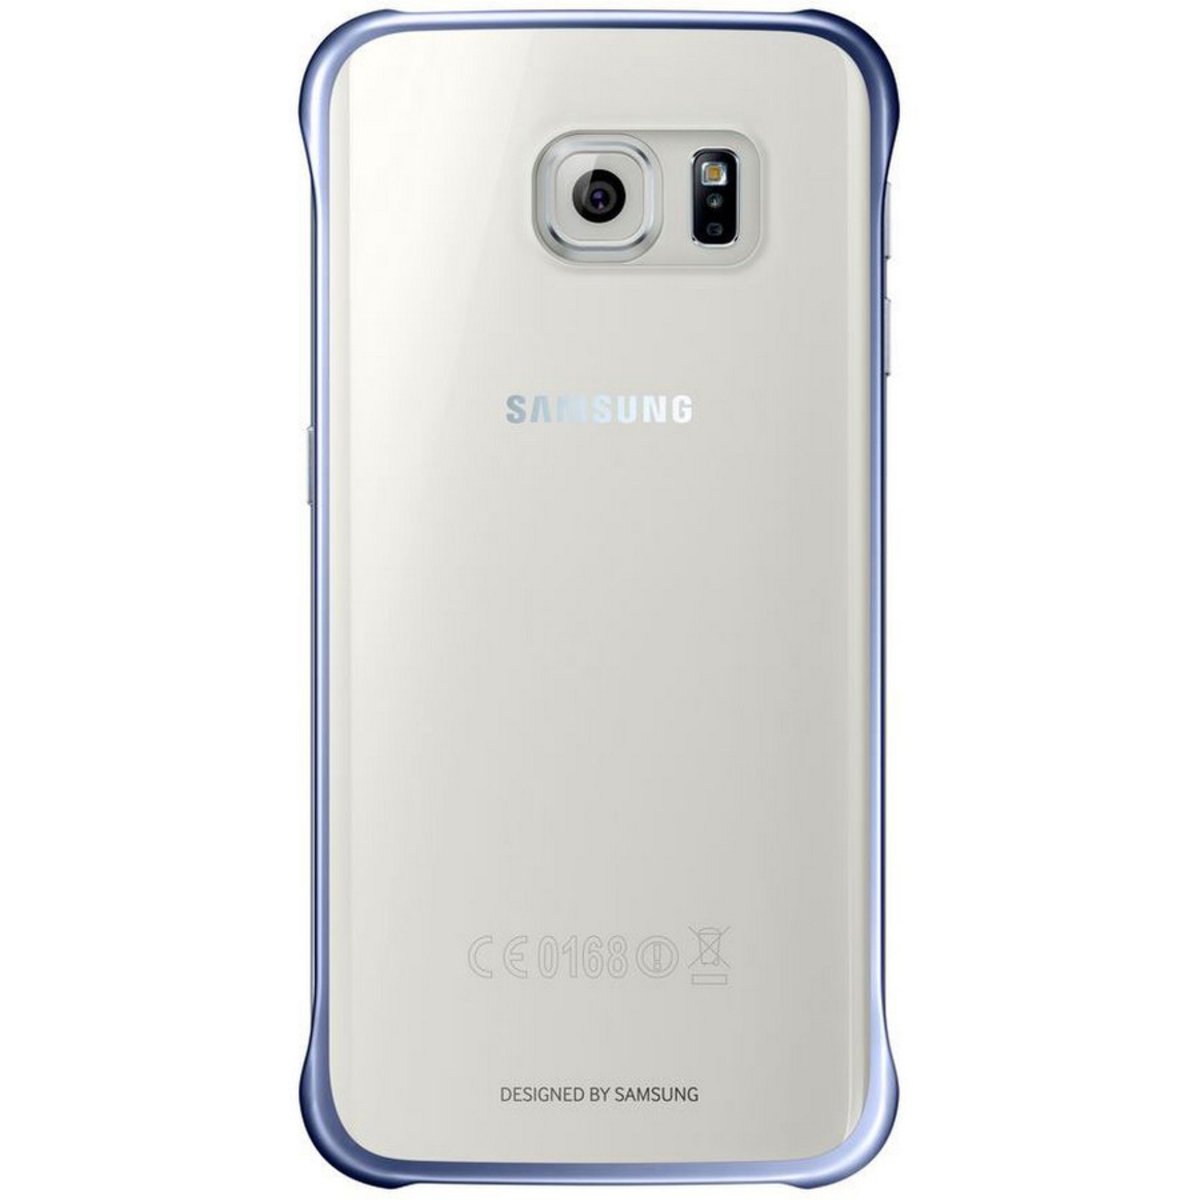 Samsung Galaxy S6 Protect Cover Black